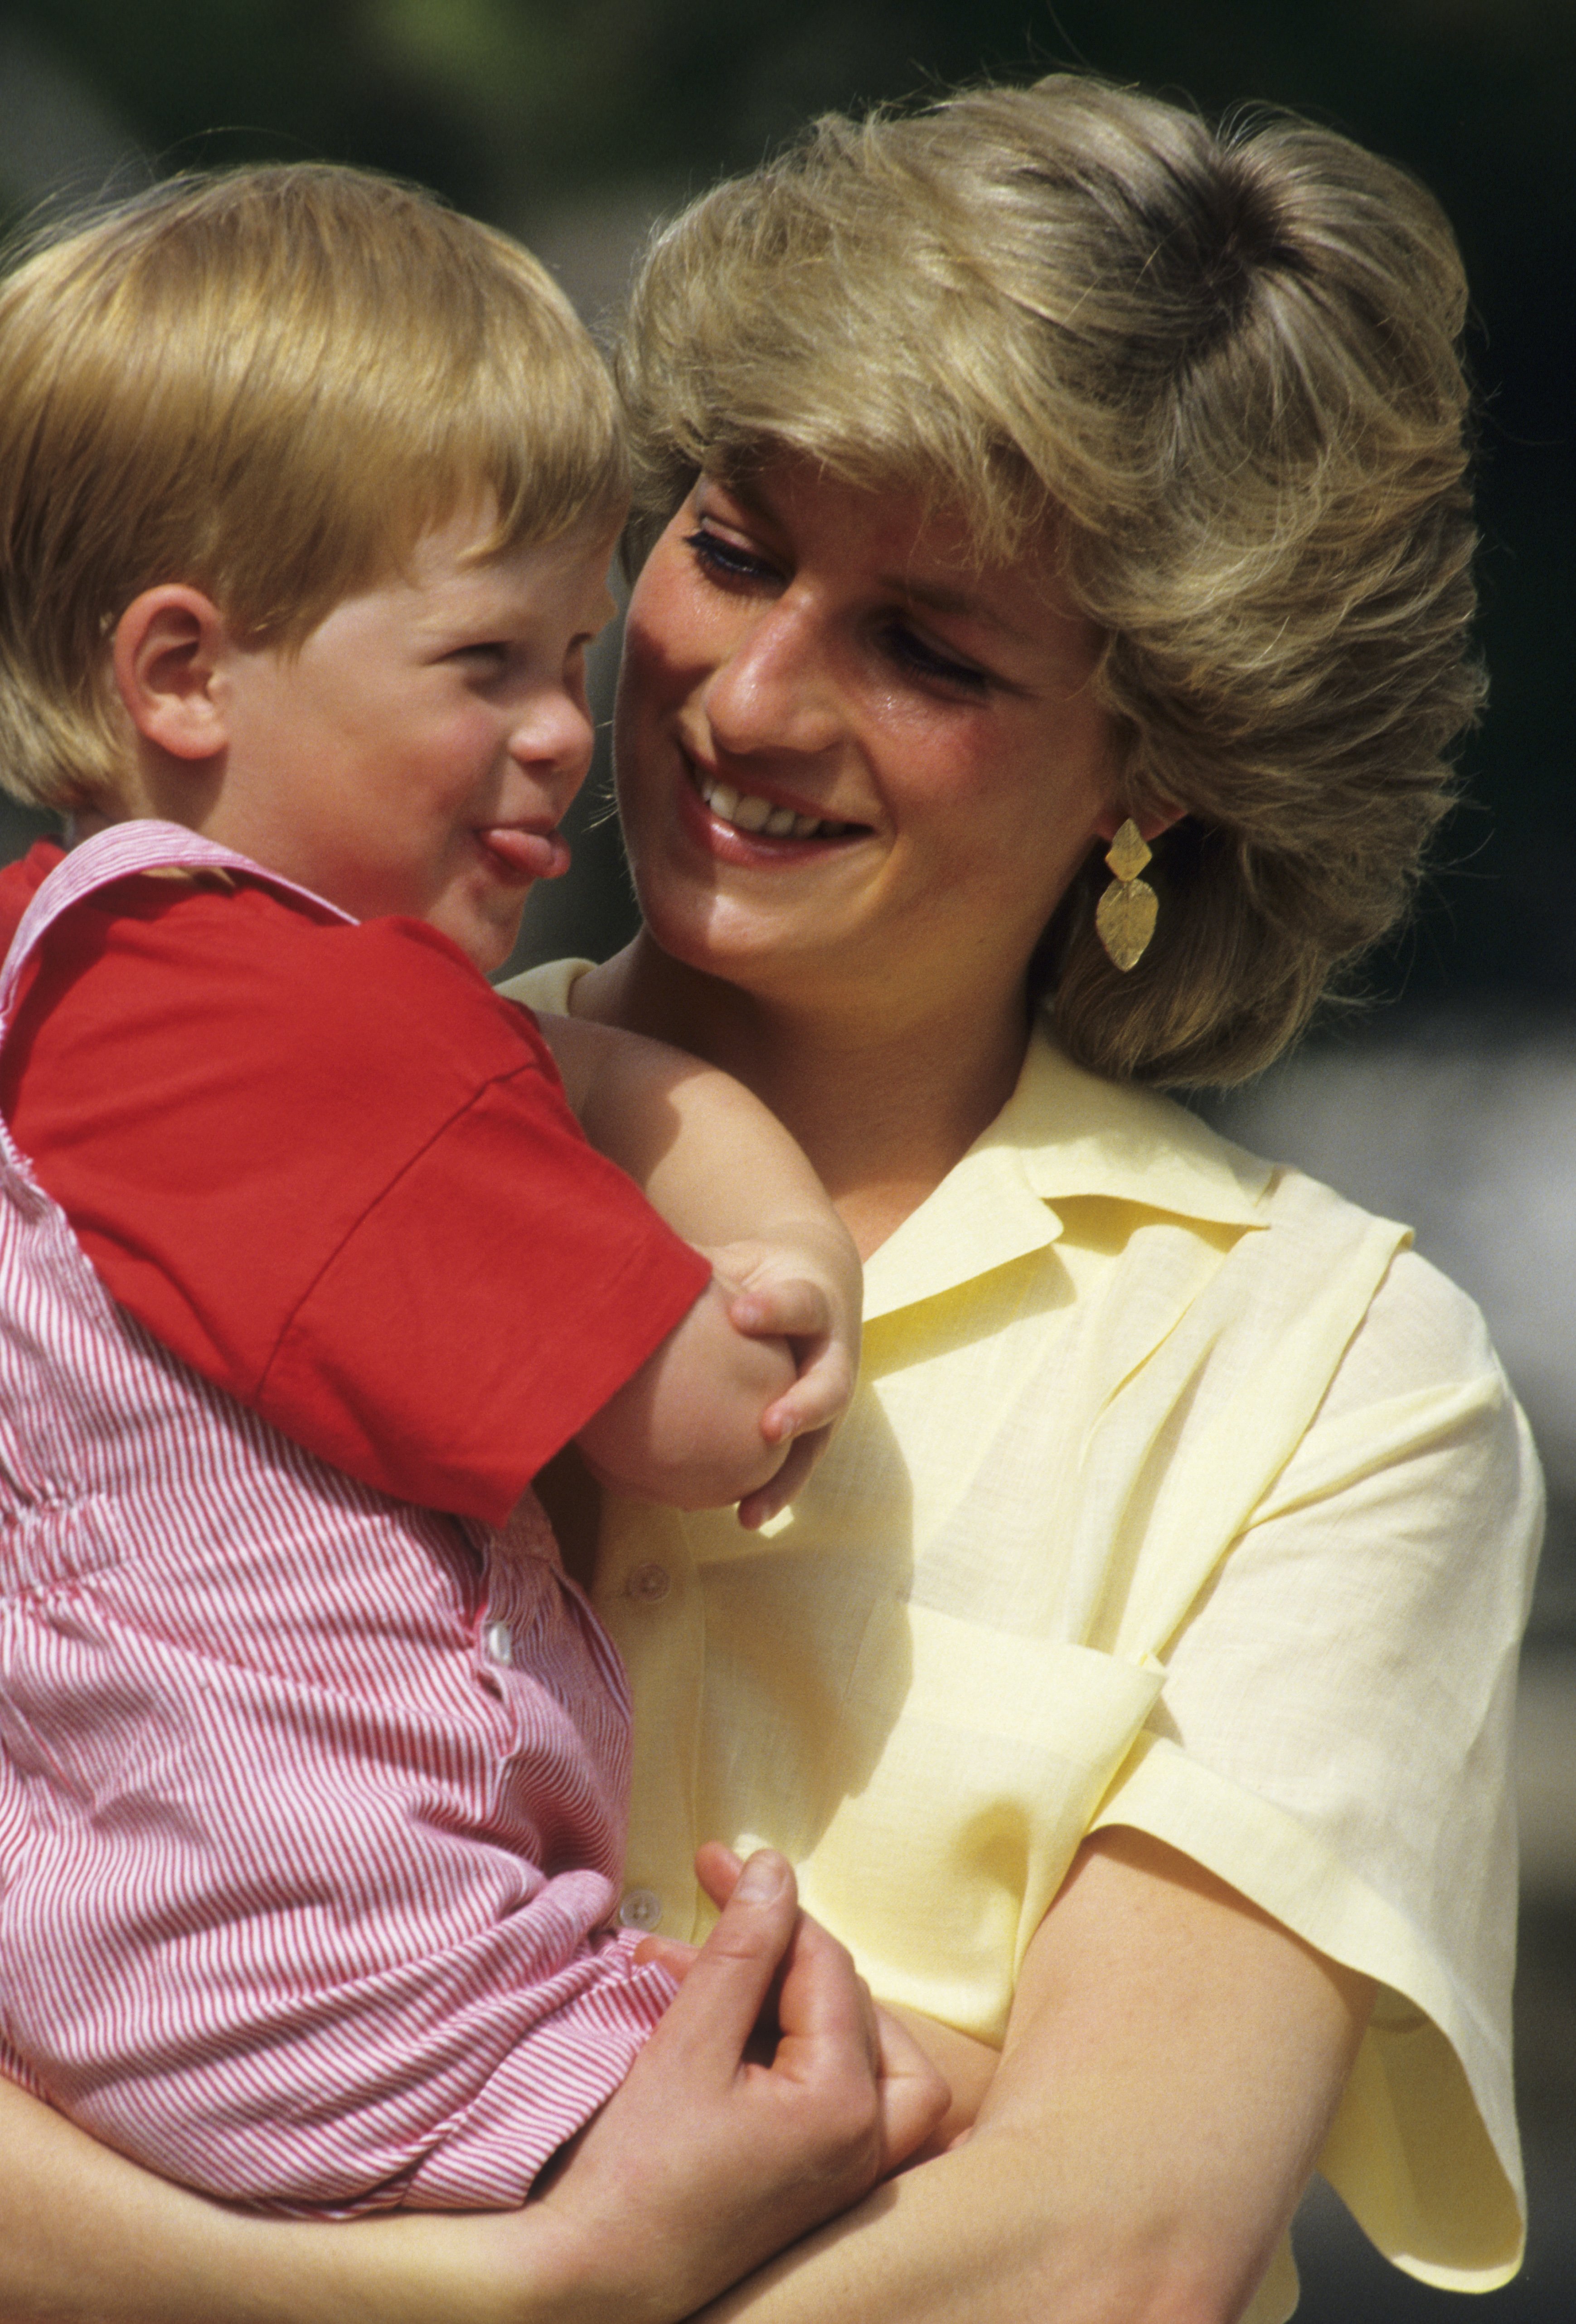 Princess Diana pictured with Prince Harry on holiday on August 10, 1987 in Majorca, Spain. | Source: Getty Images